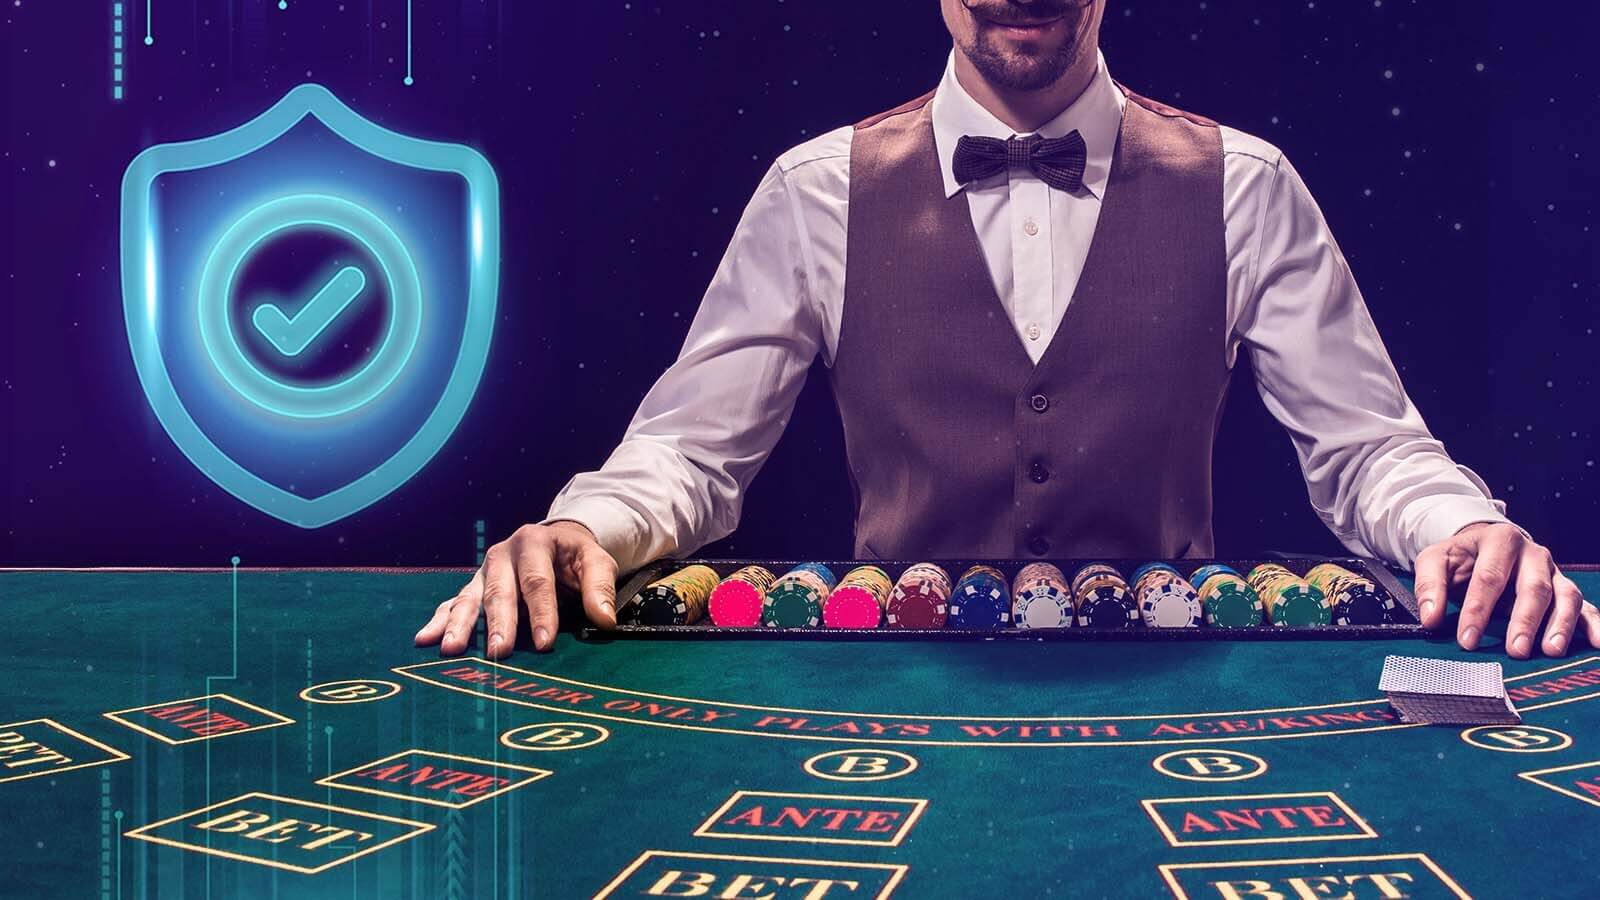 How To Sell Protecting the rights of players in online casinos in Brazil